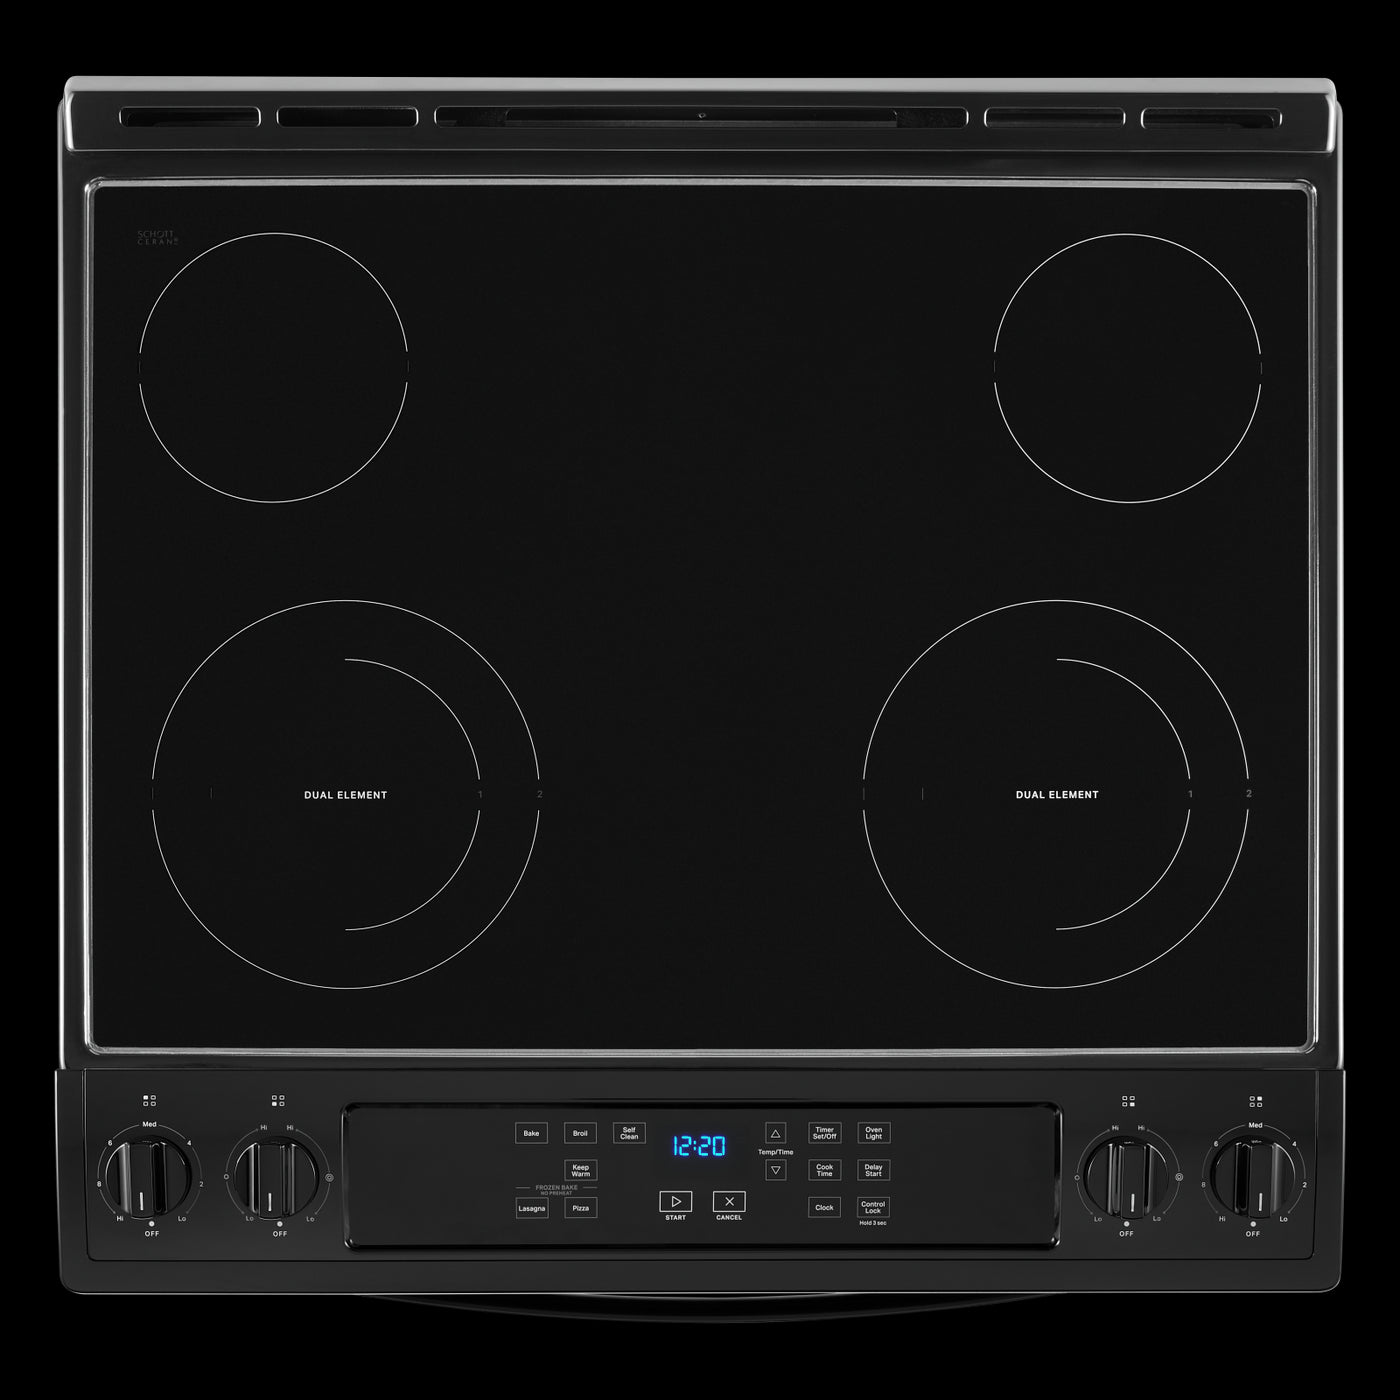 Whirlpool Black Electric Range with Frozen Bake Technology (4.8 Cu.Ft) - YWEE515S0LB